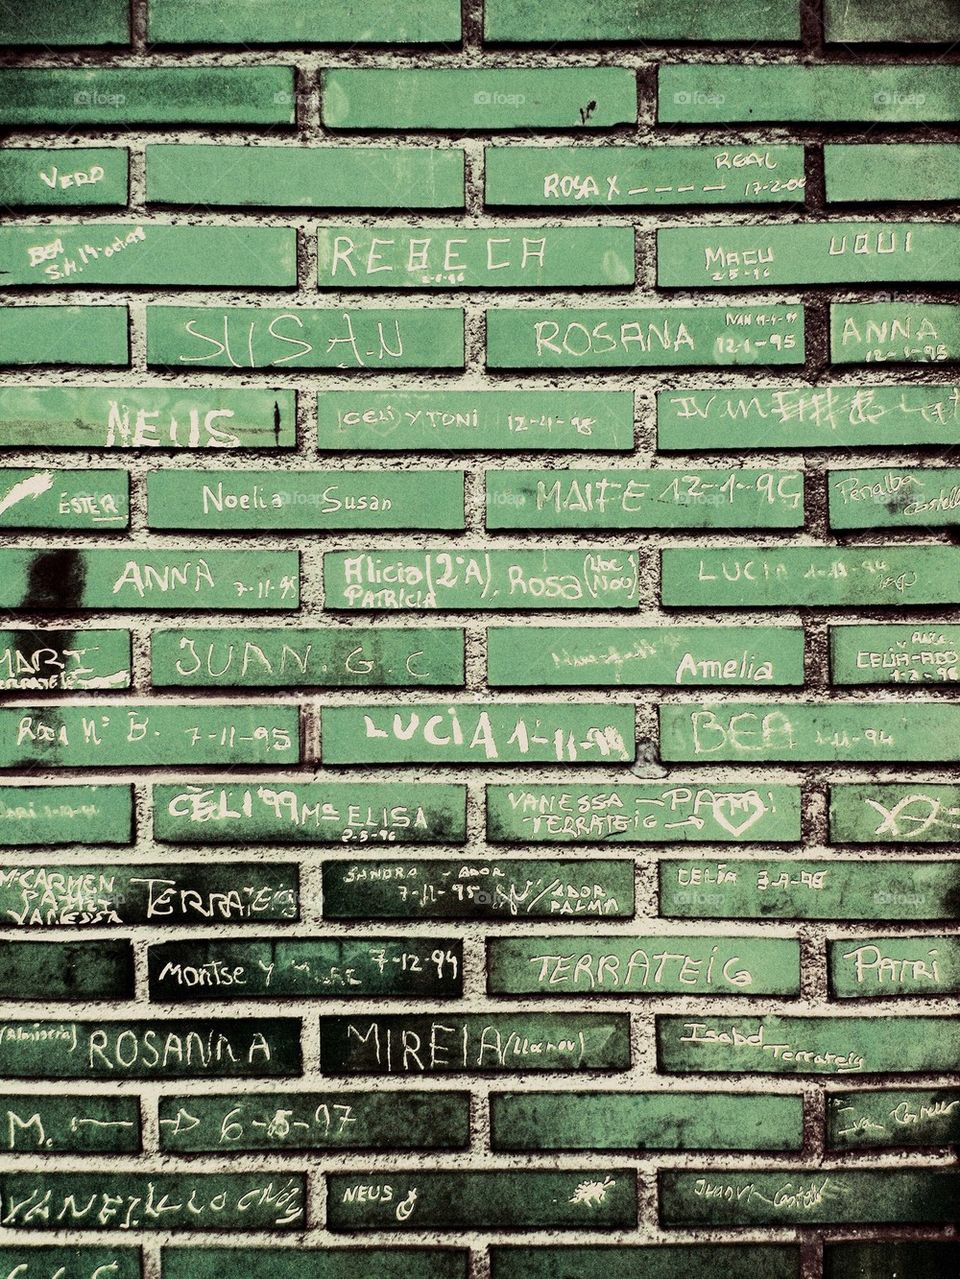 Another wall in The brick